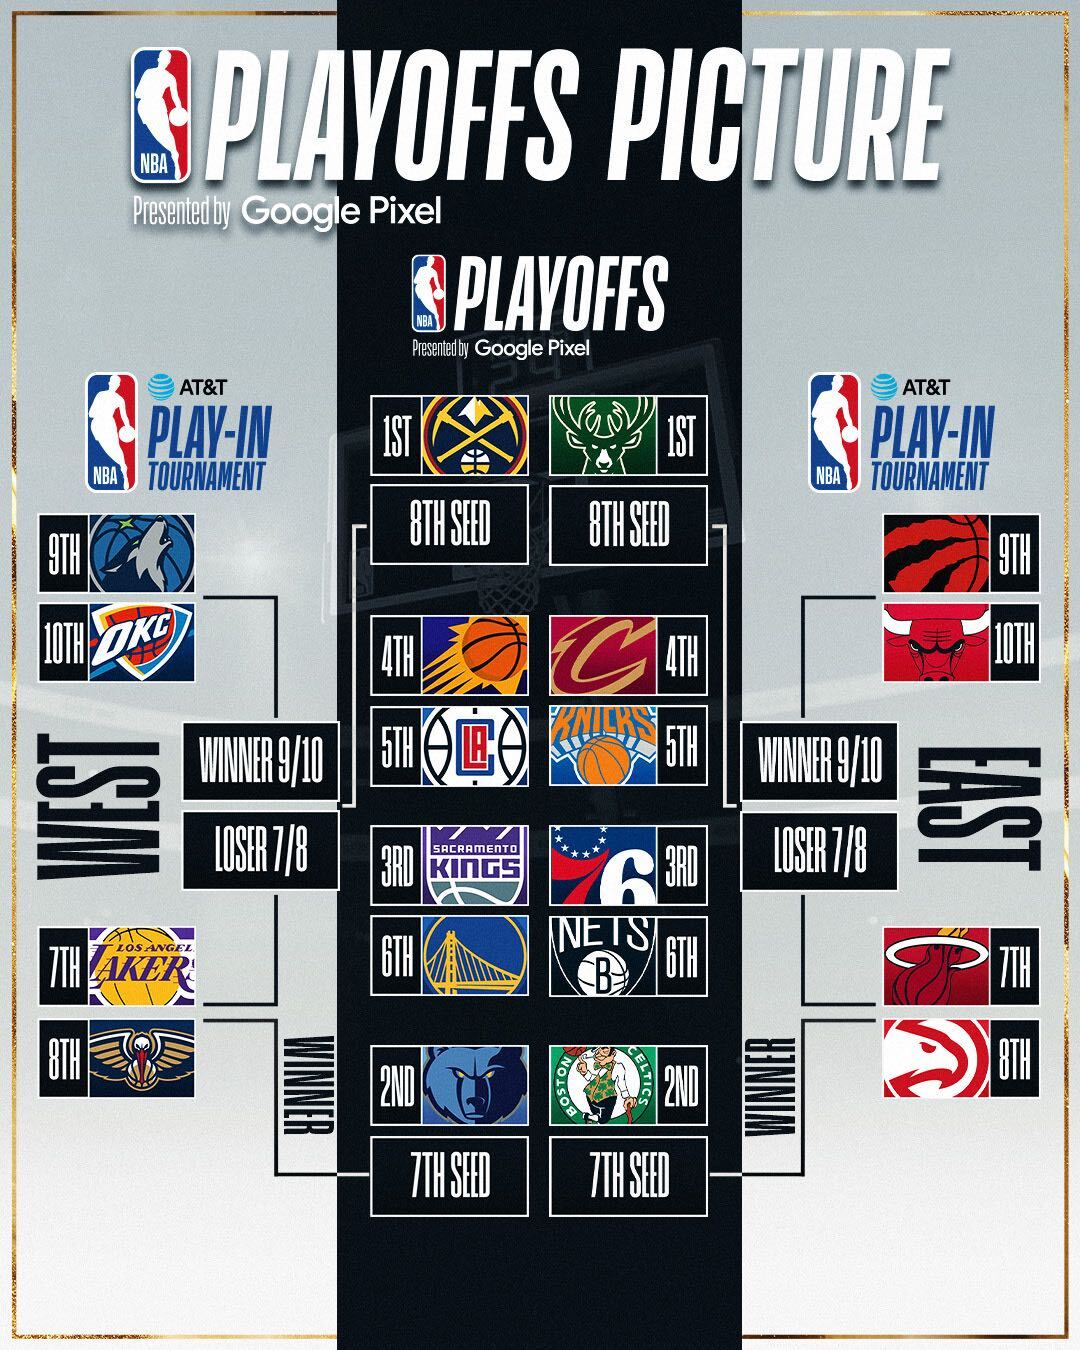 what playoff games are on tomorrow